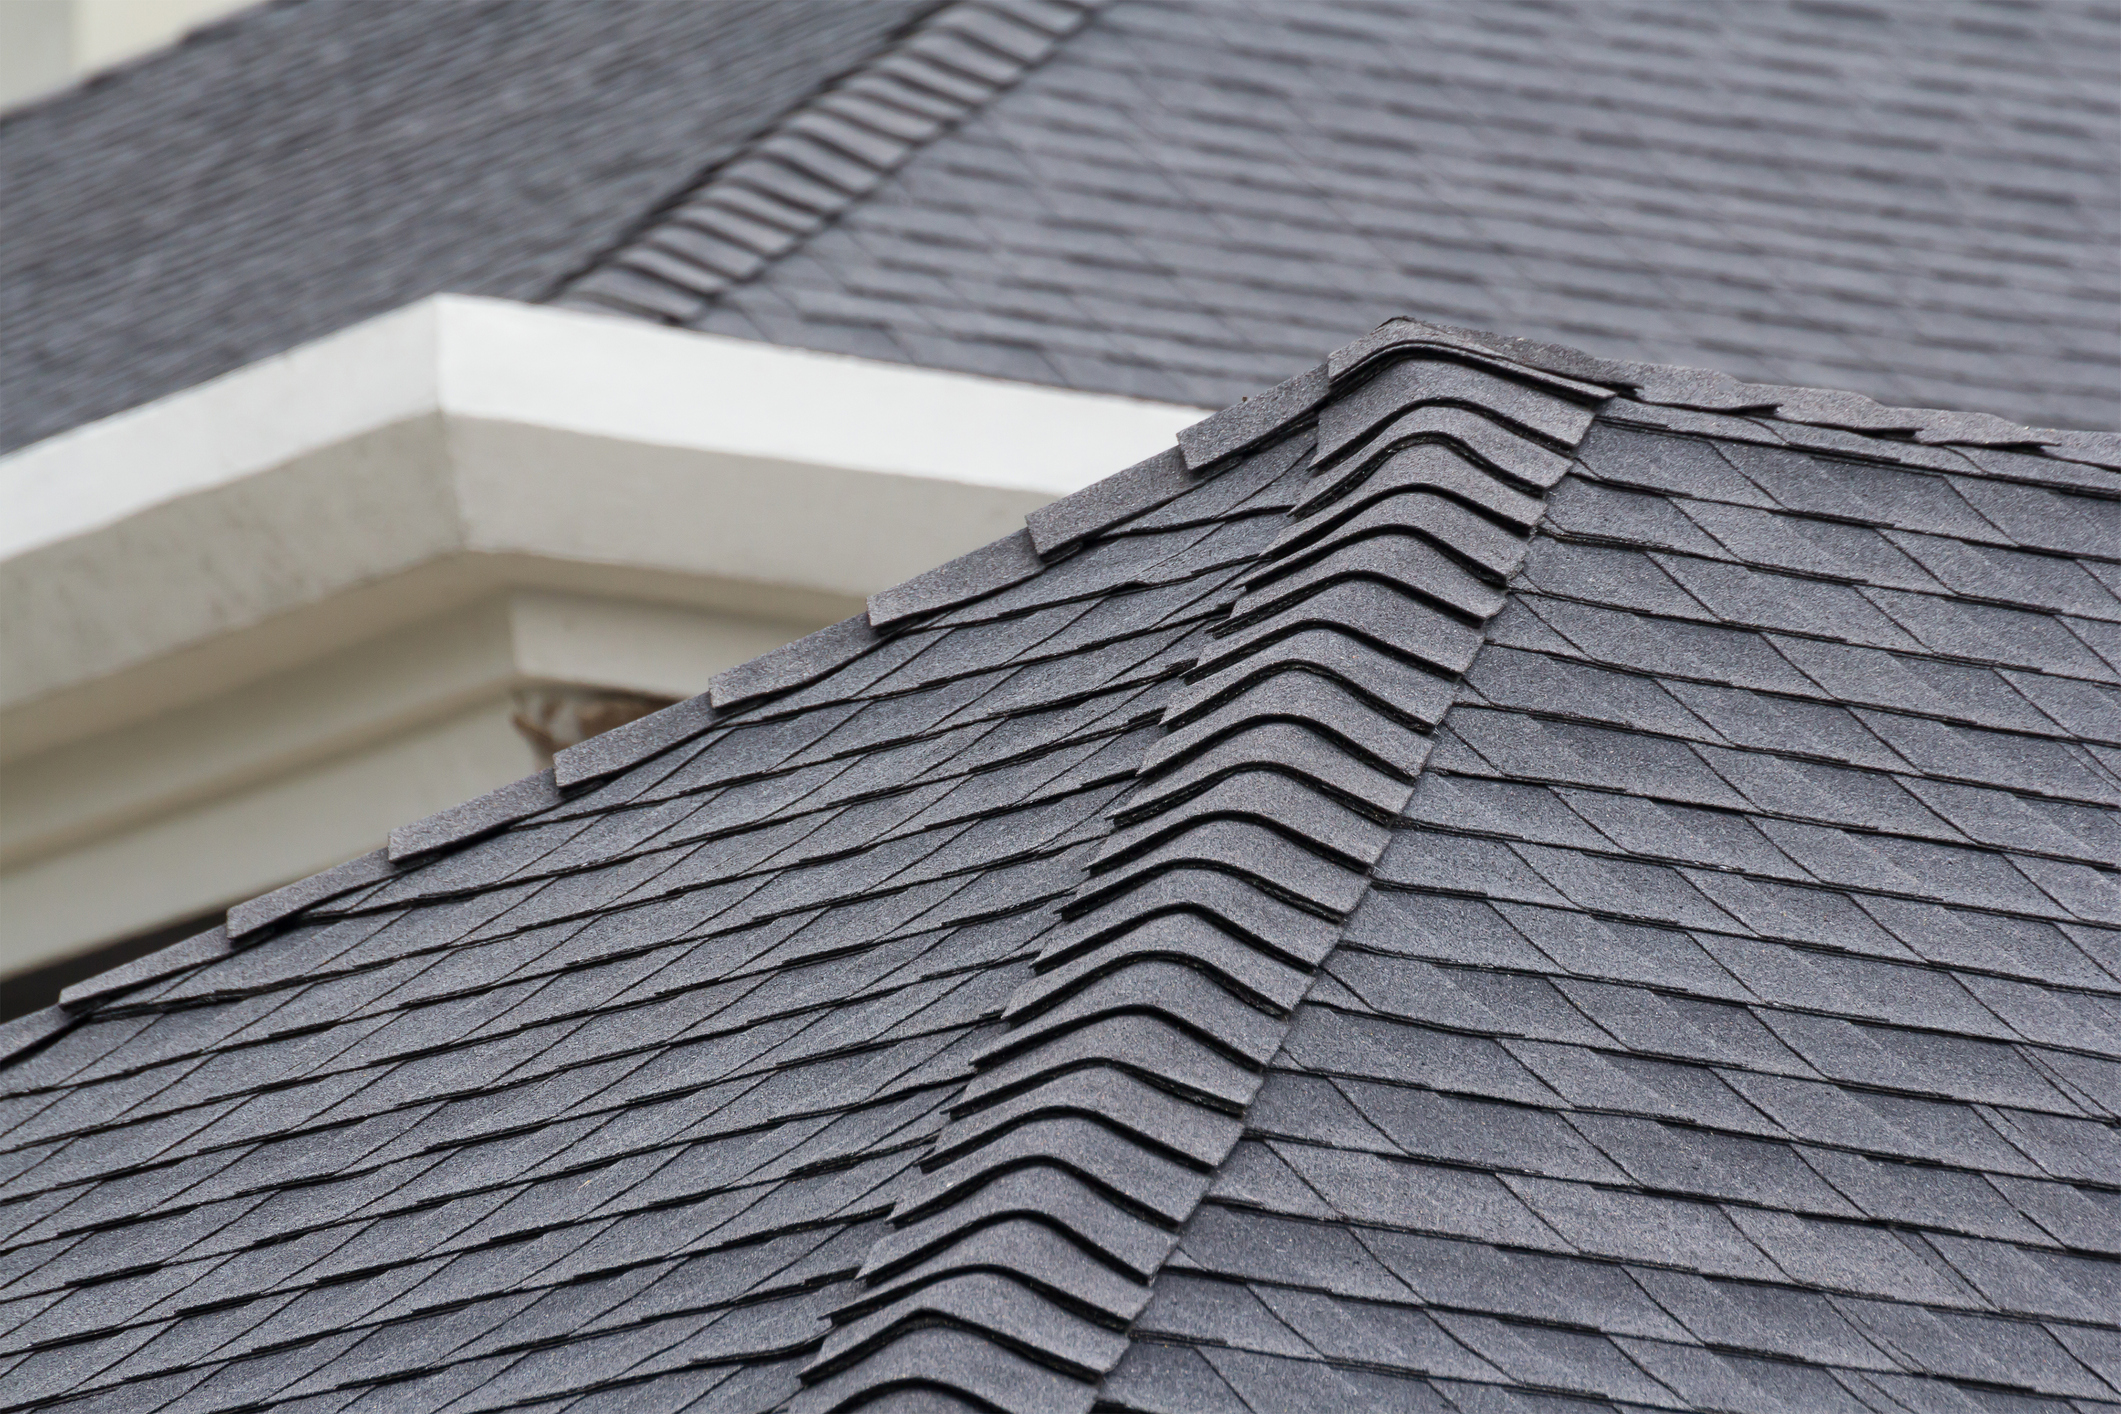 edge of Roof shingles on top of the house, dark asphalt tiles on the roof background. Air